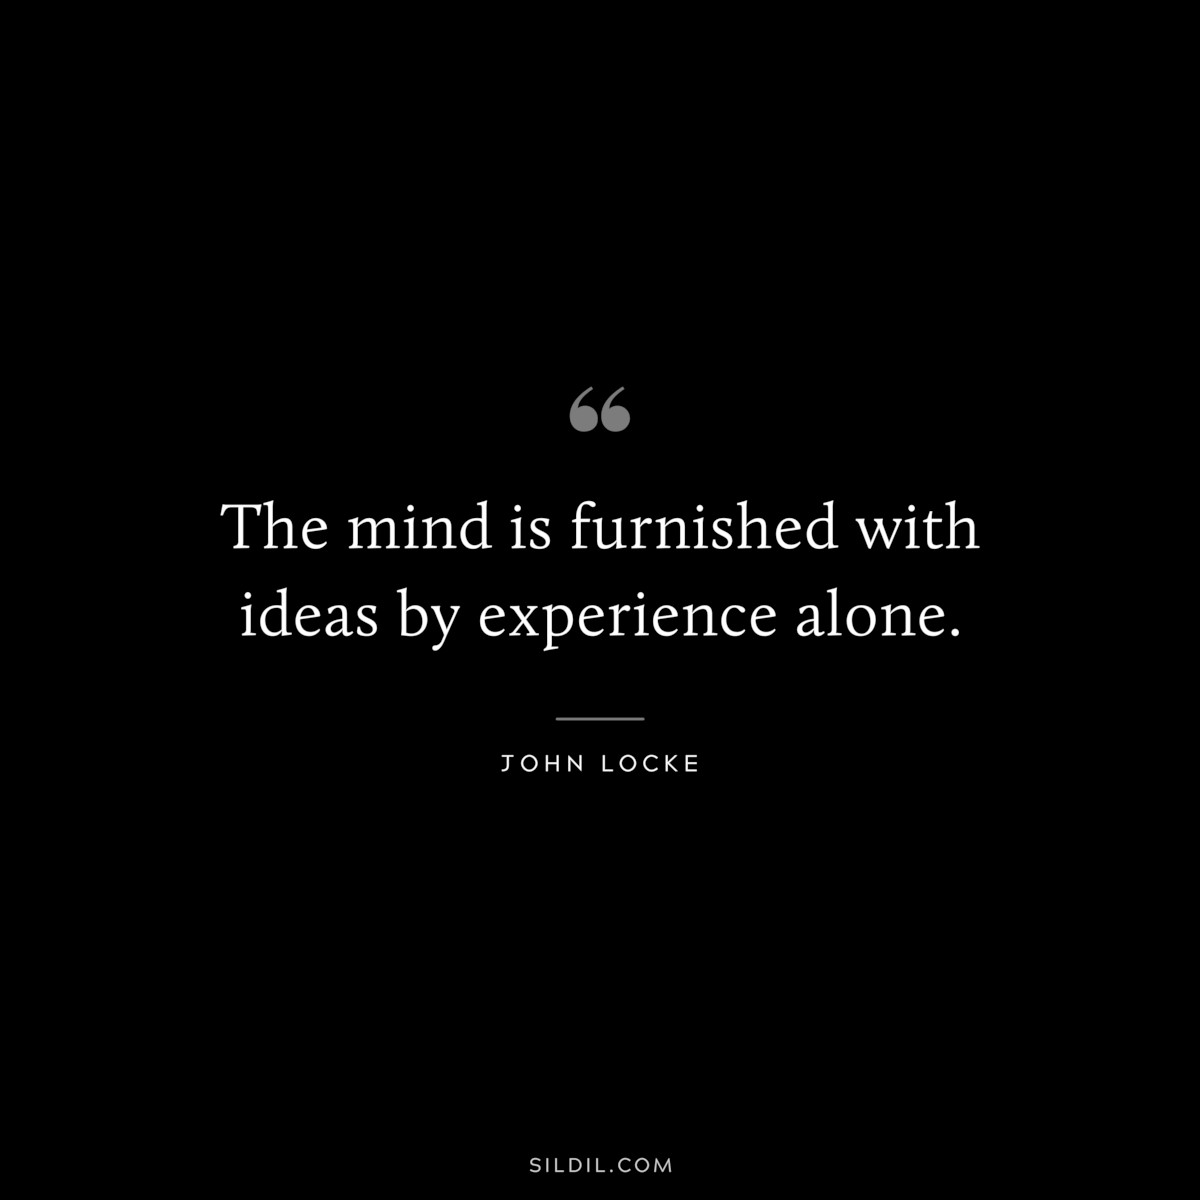 The mind is furnished with ideas by experience alone. ― John Locke